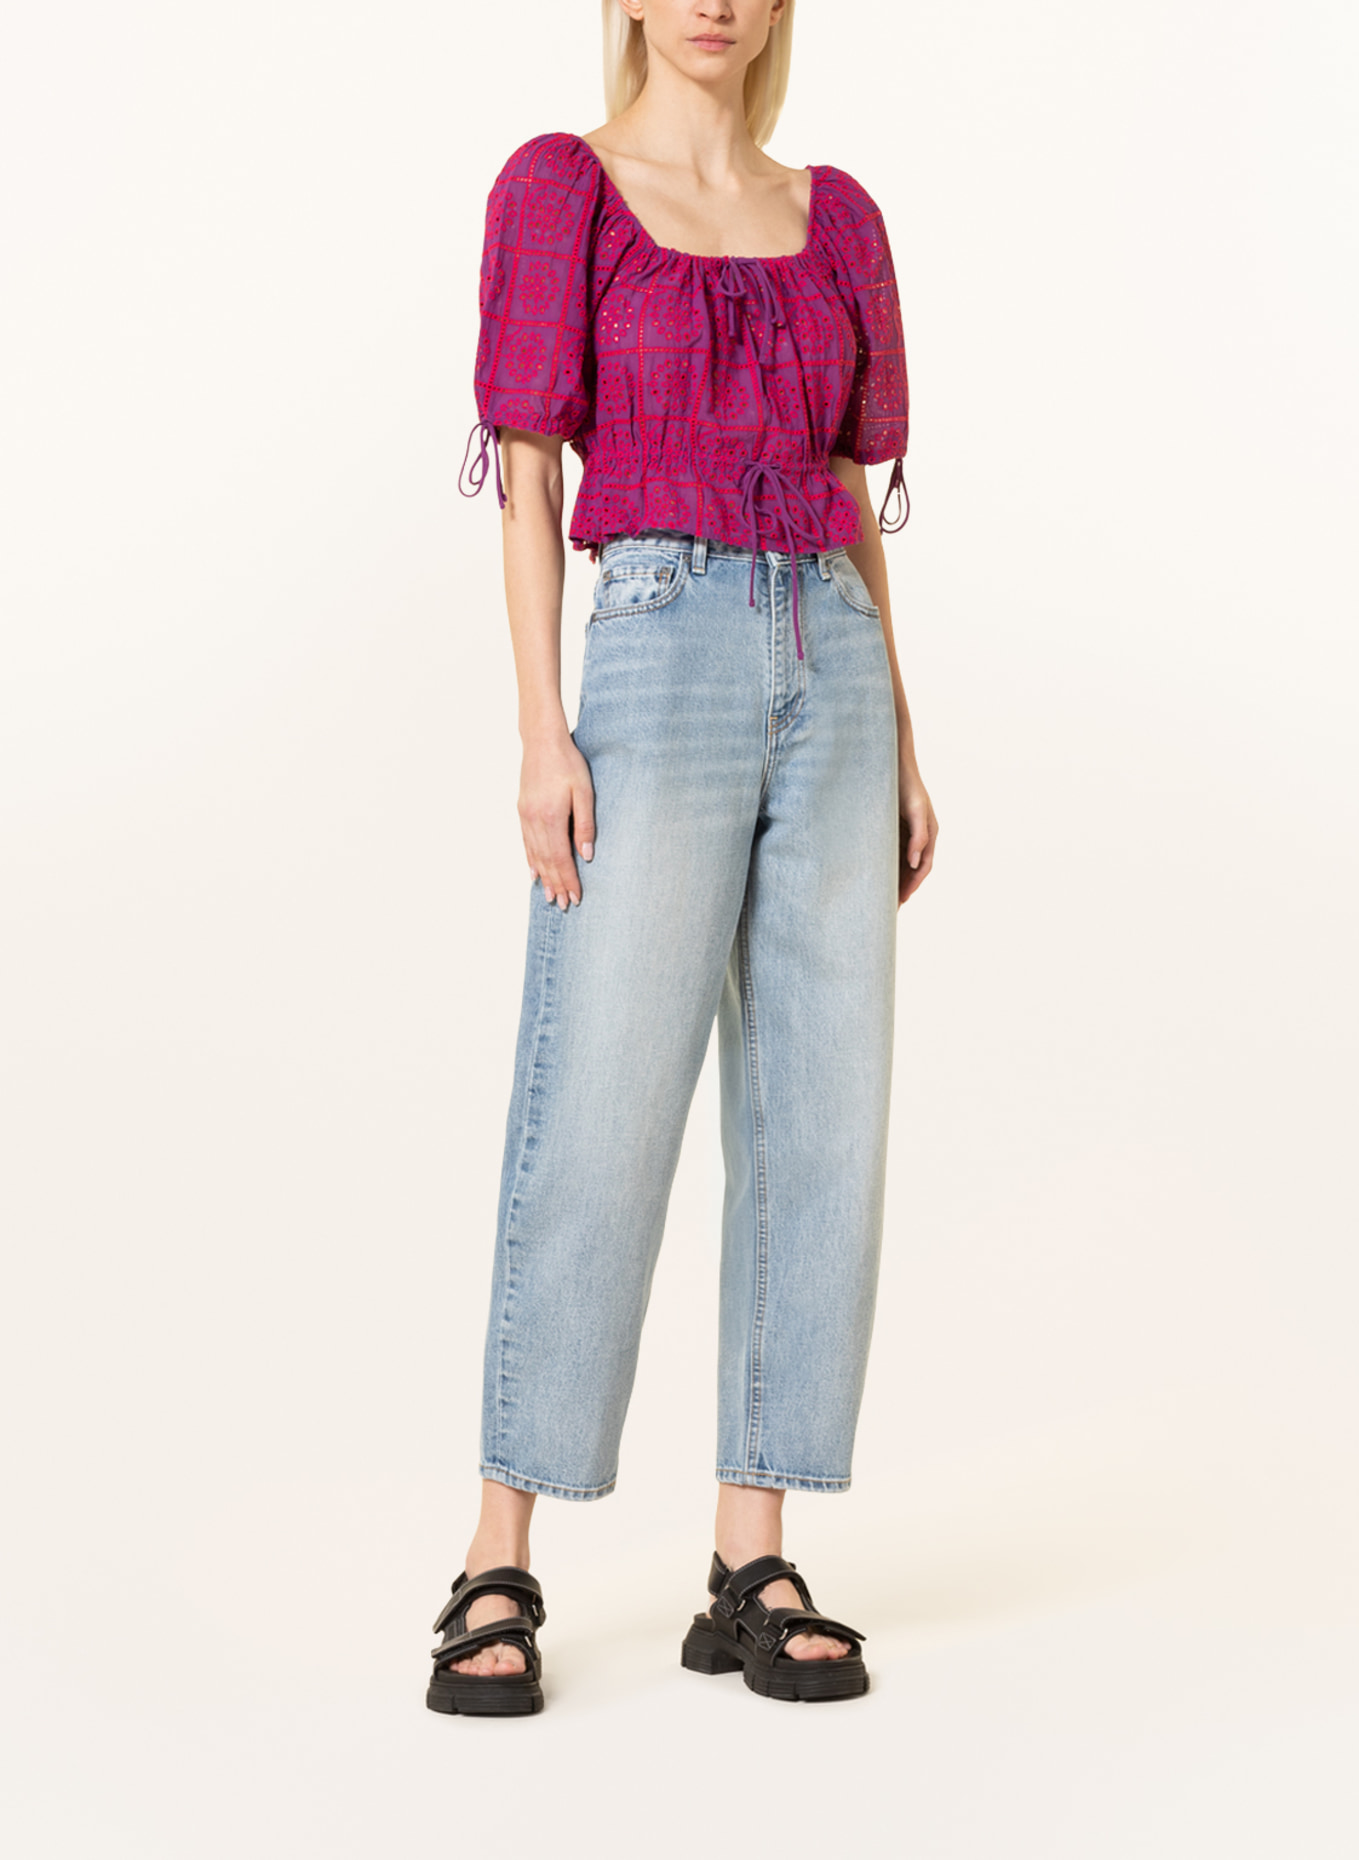 GANNI Cropped shirt blouse made of lace, Color: PURPLE/ PINK (Image 2)